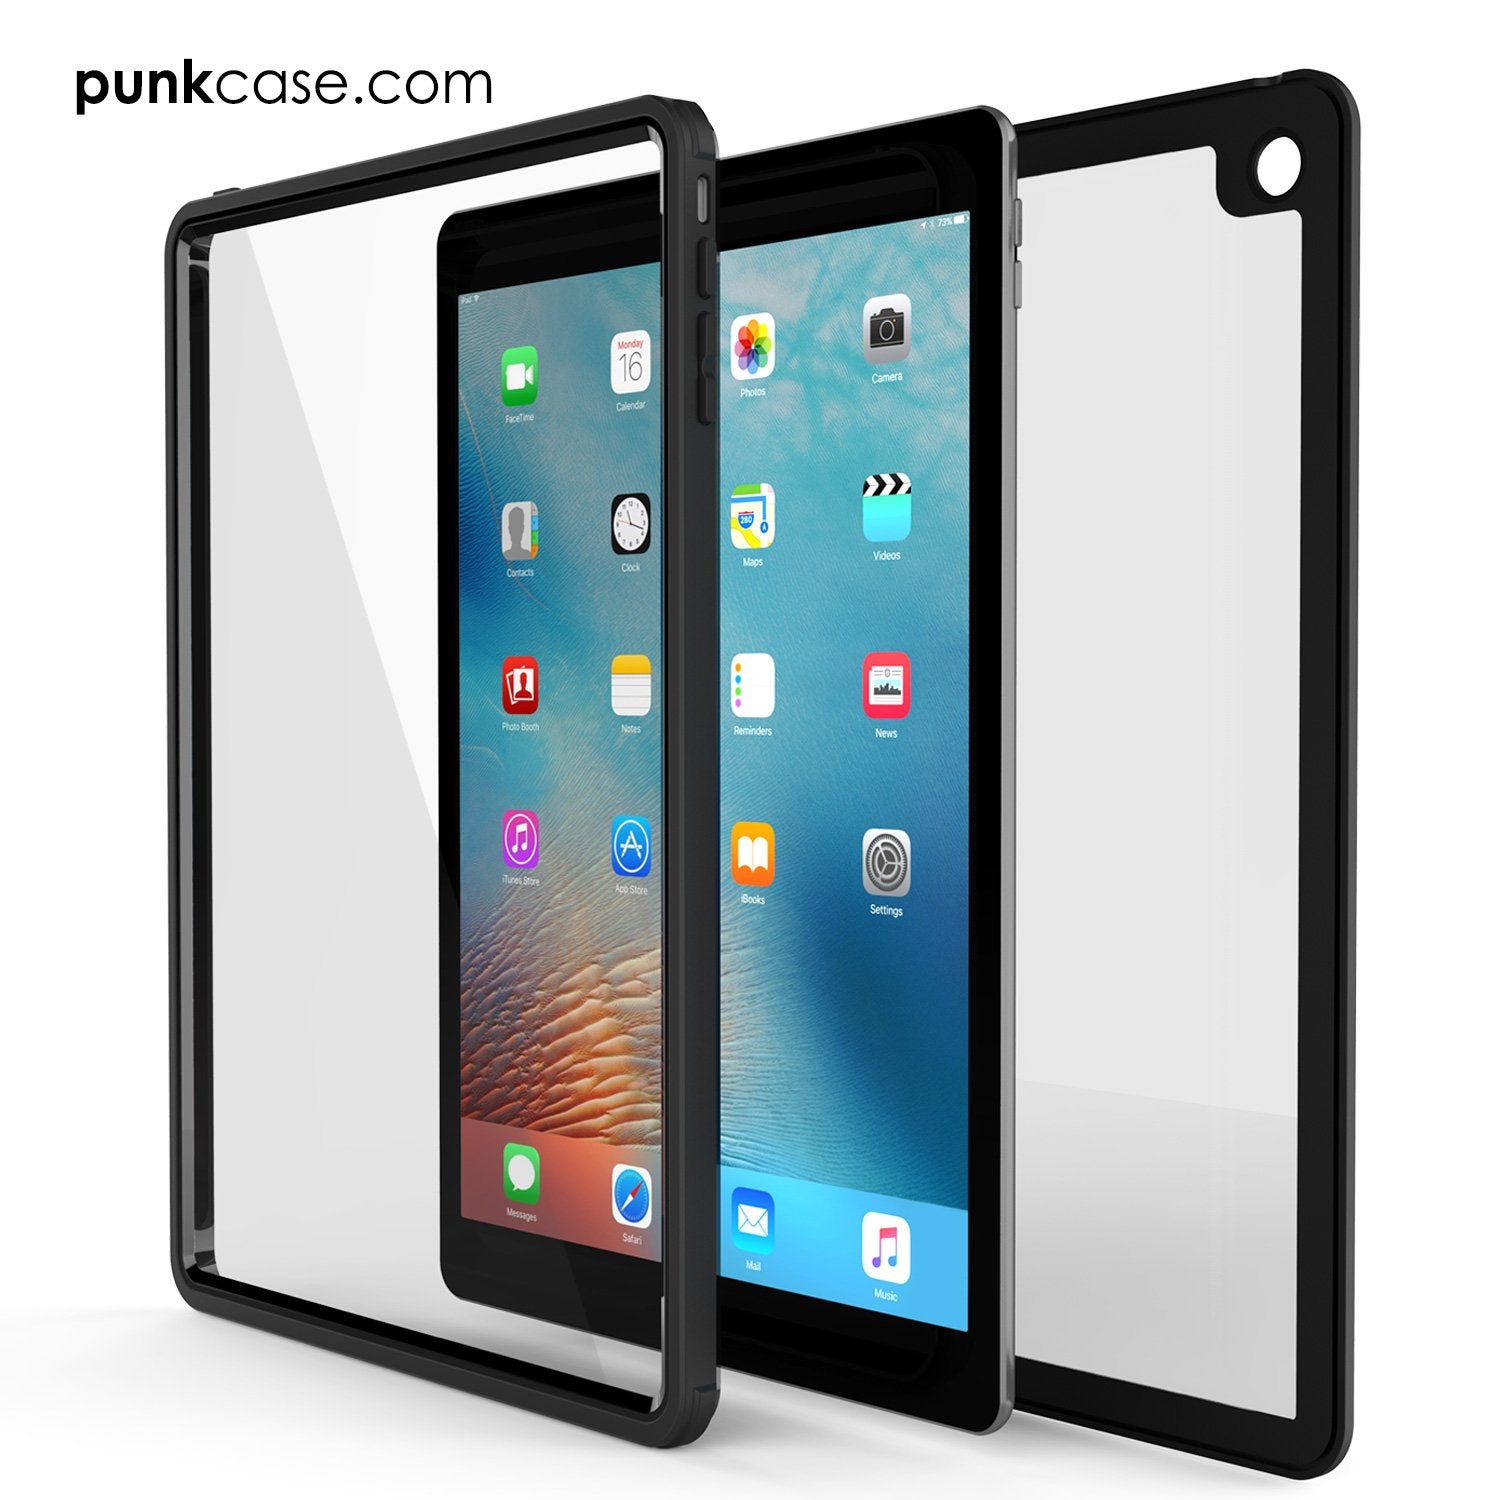 Punkcase iPad Pro 9.7 Case [CRYSTAL Series], Waterproof, Ultra-Thin Cover [Shockproof] [Dustproof] with Built-in Screen Protector [Black]